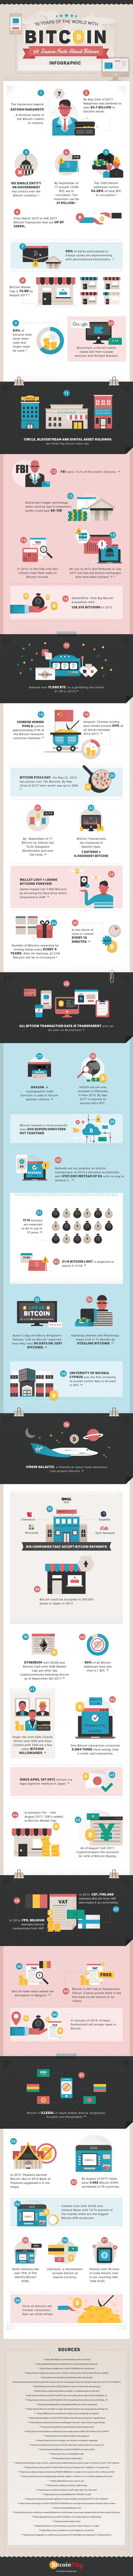 58 Insane Facts About Bitcoin